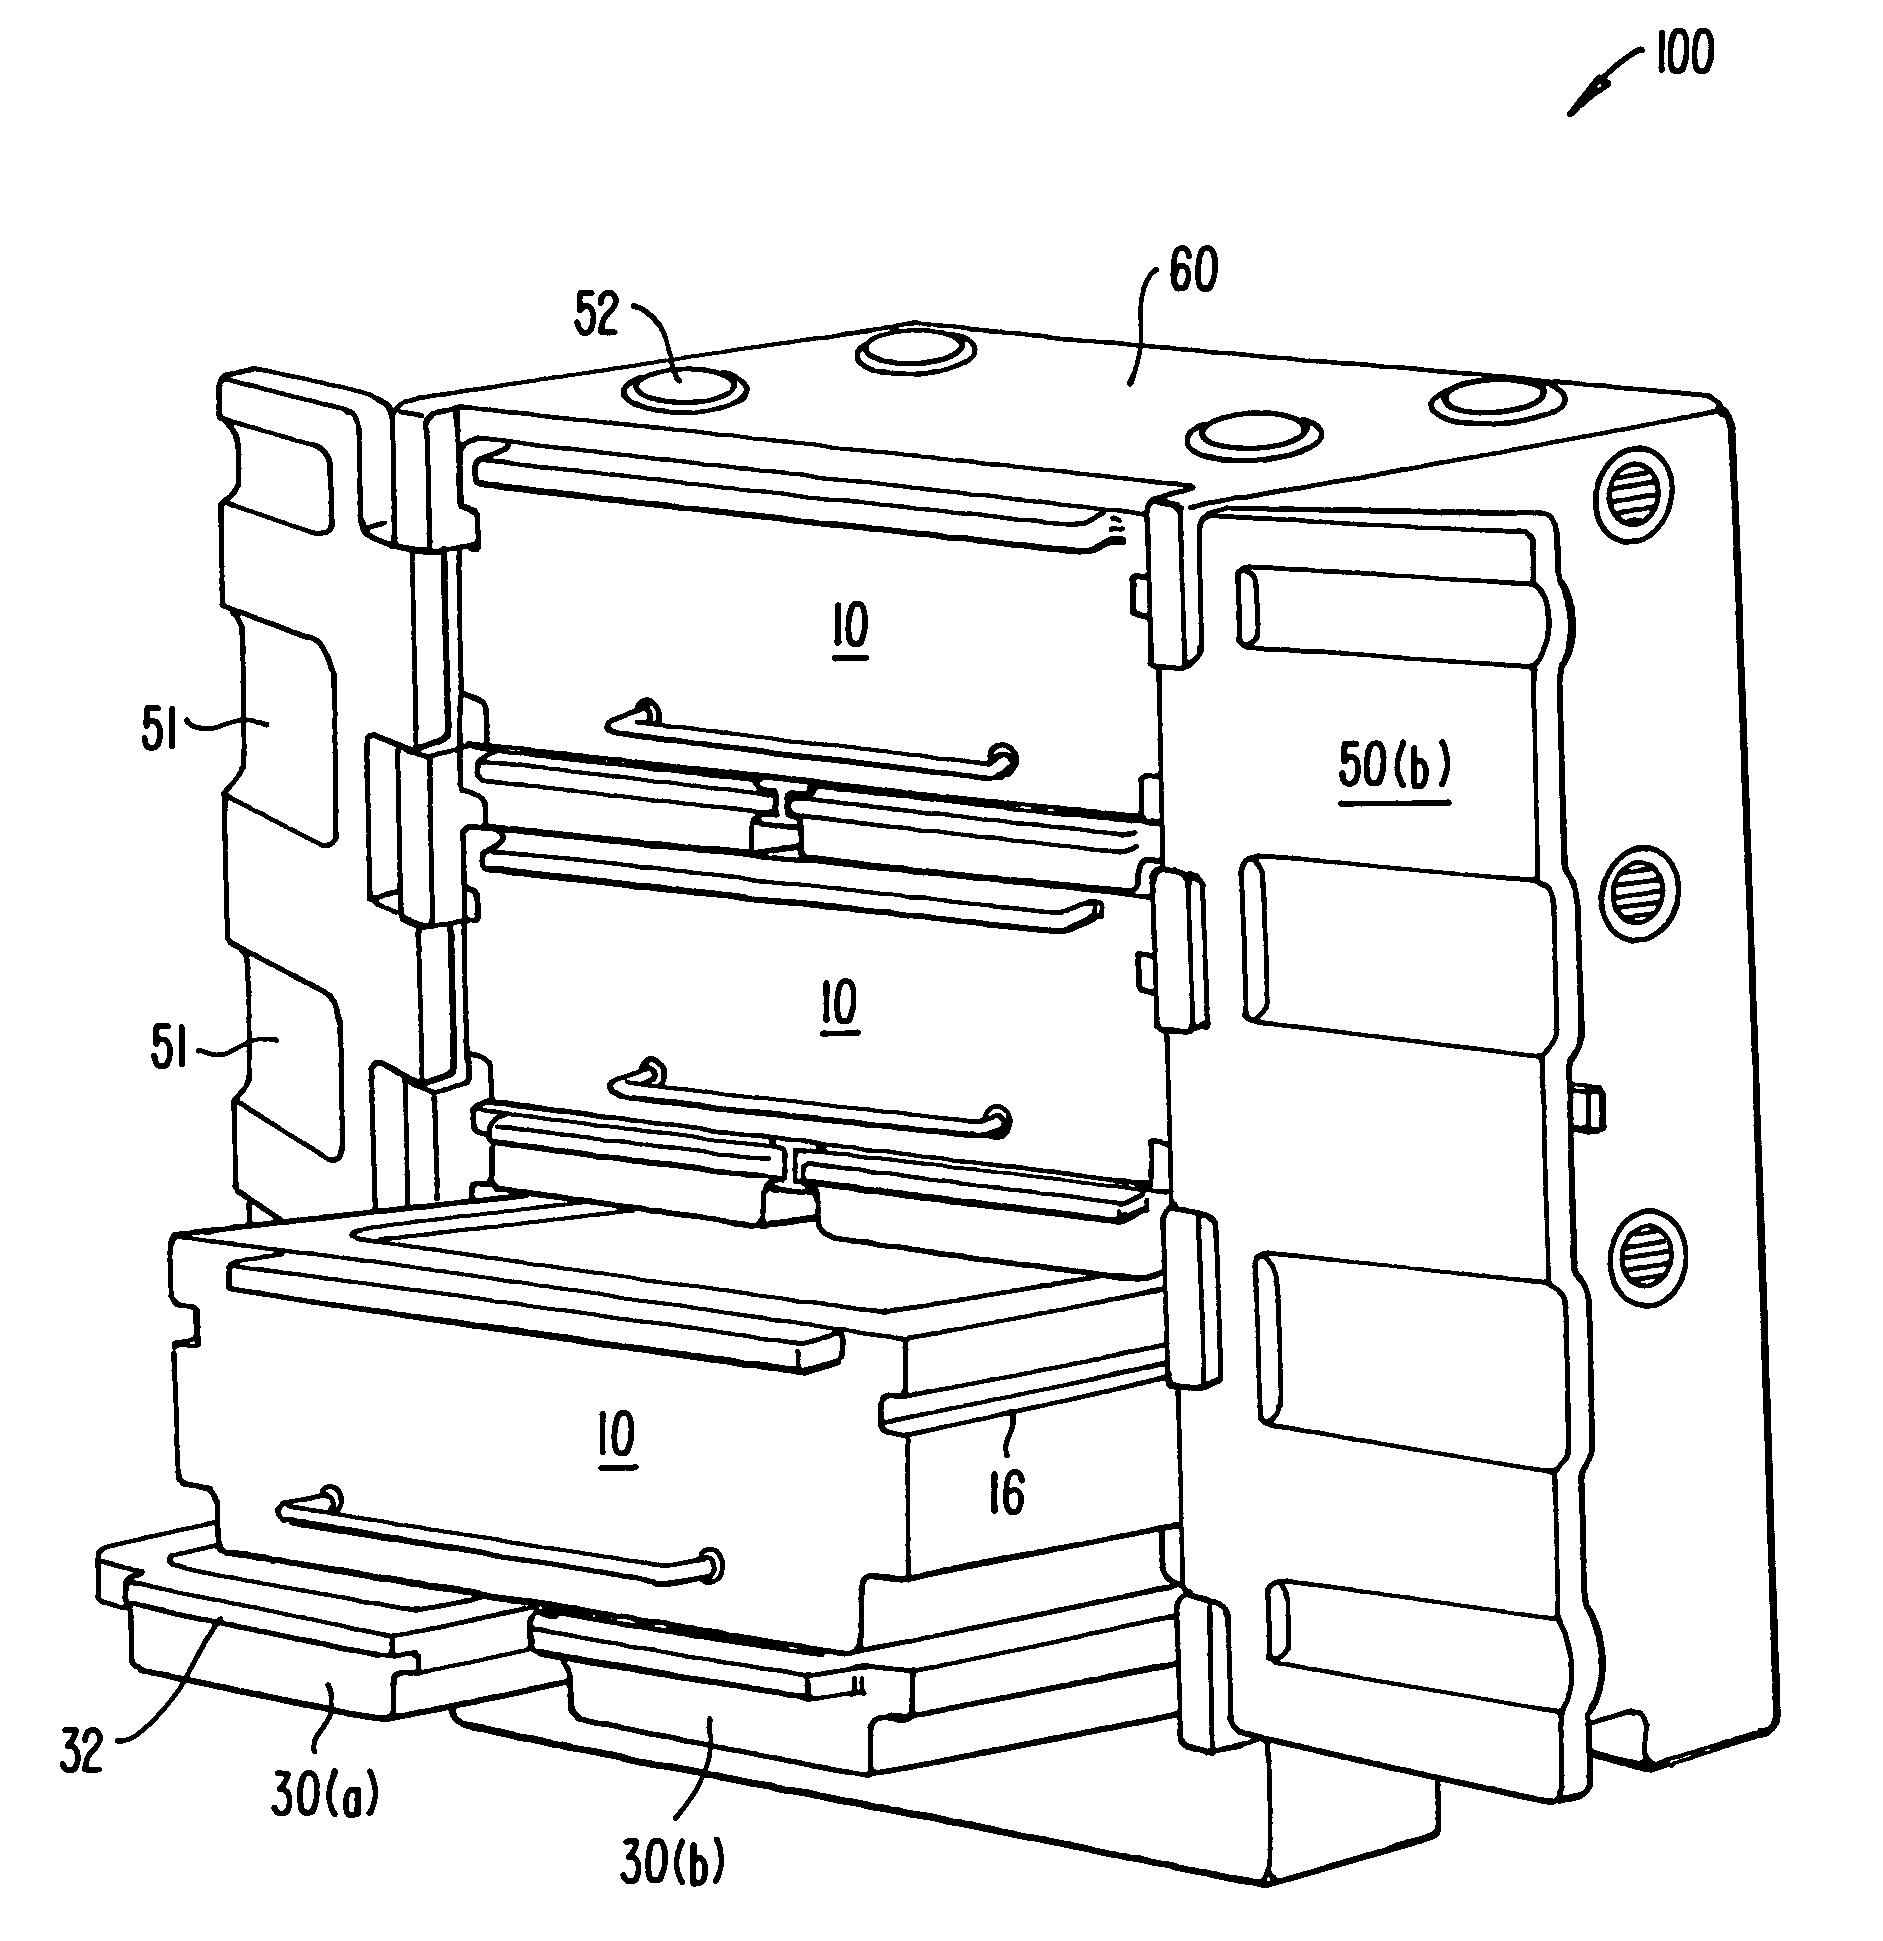 Composting apparatus and method